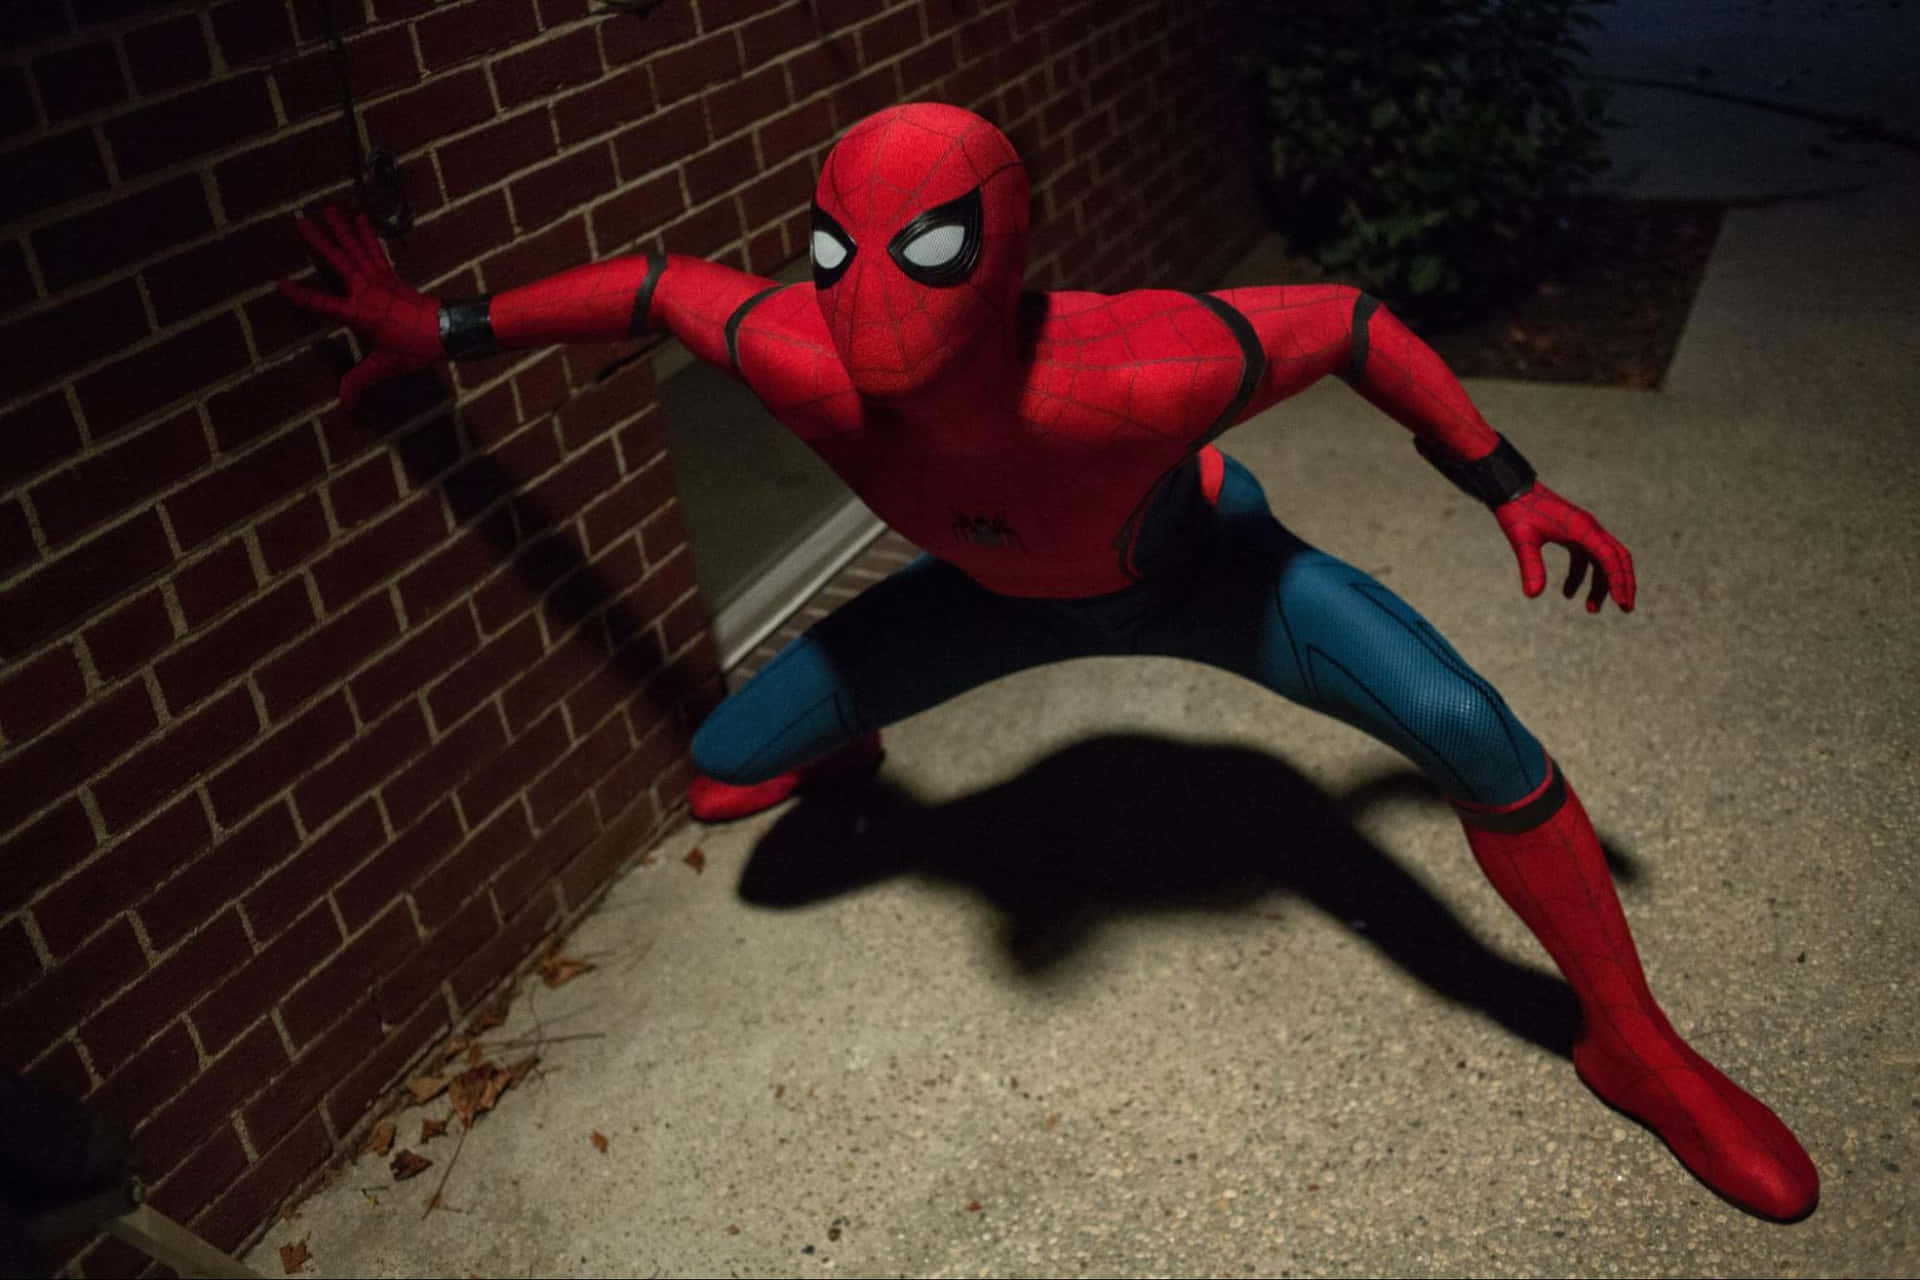 "Powerful, special and unique - Spider Man Homecoming is here!" Wallpaper